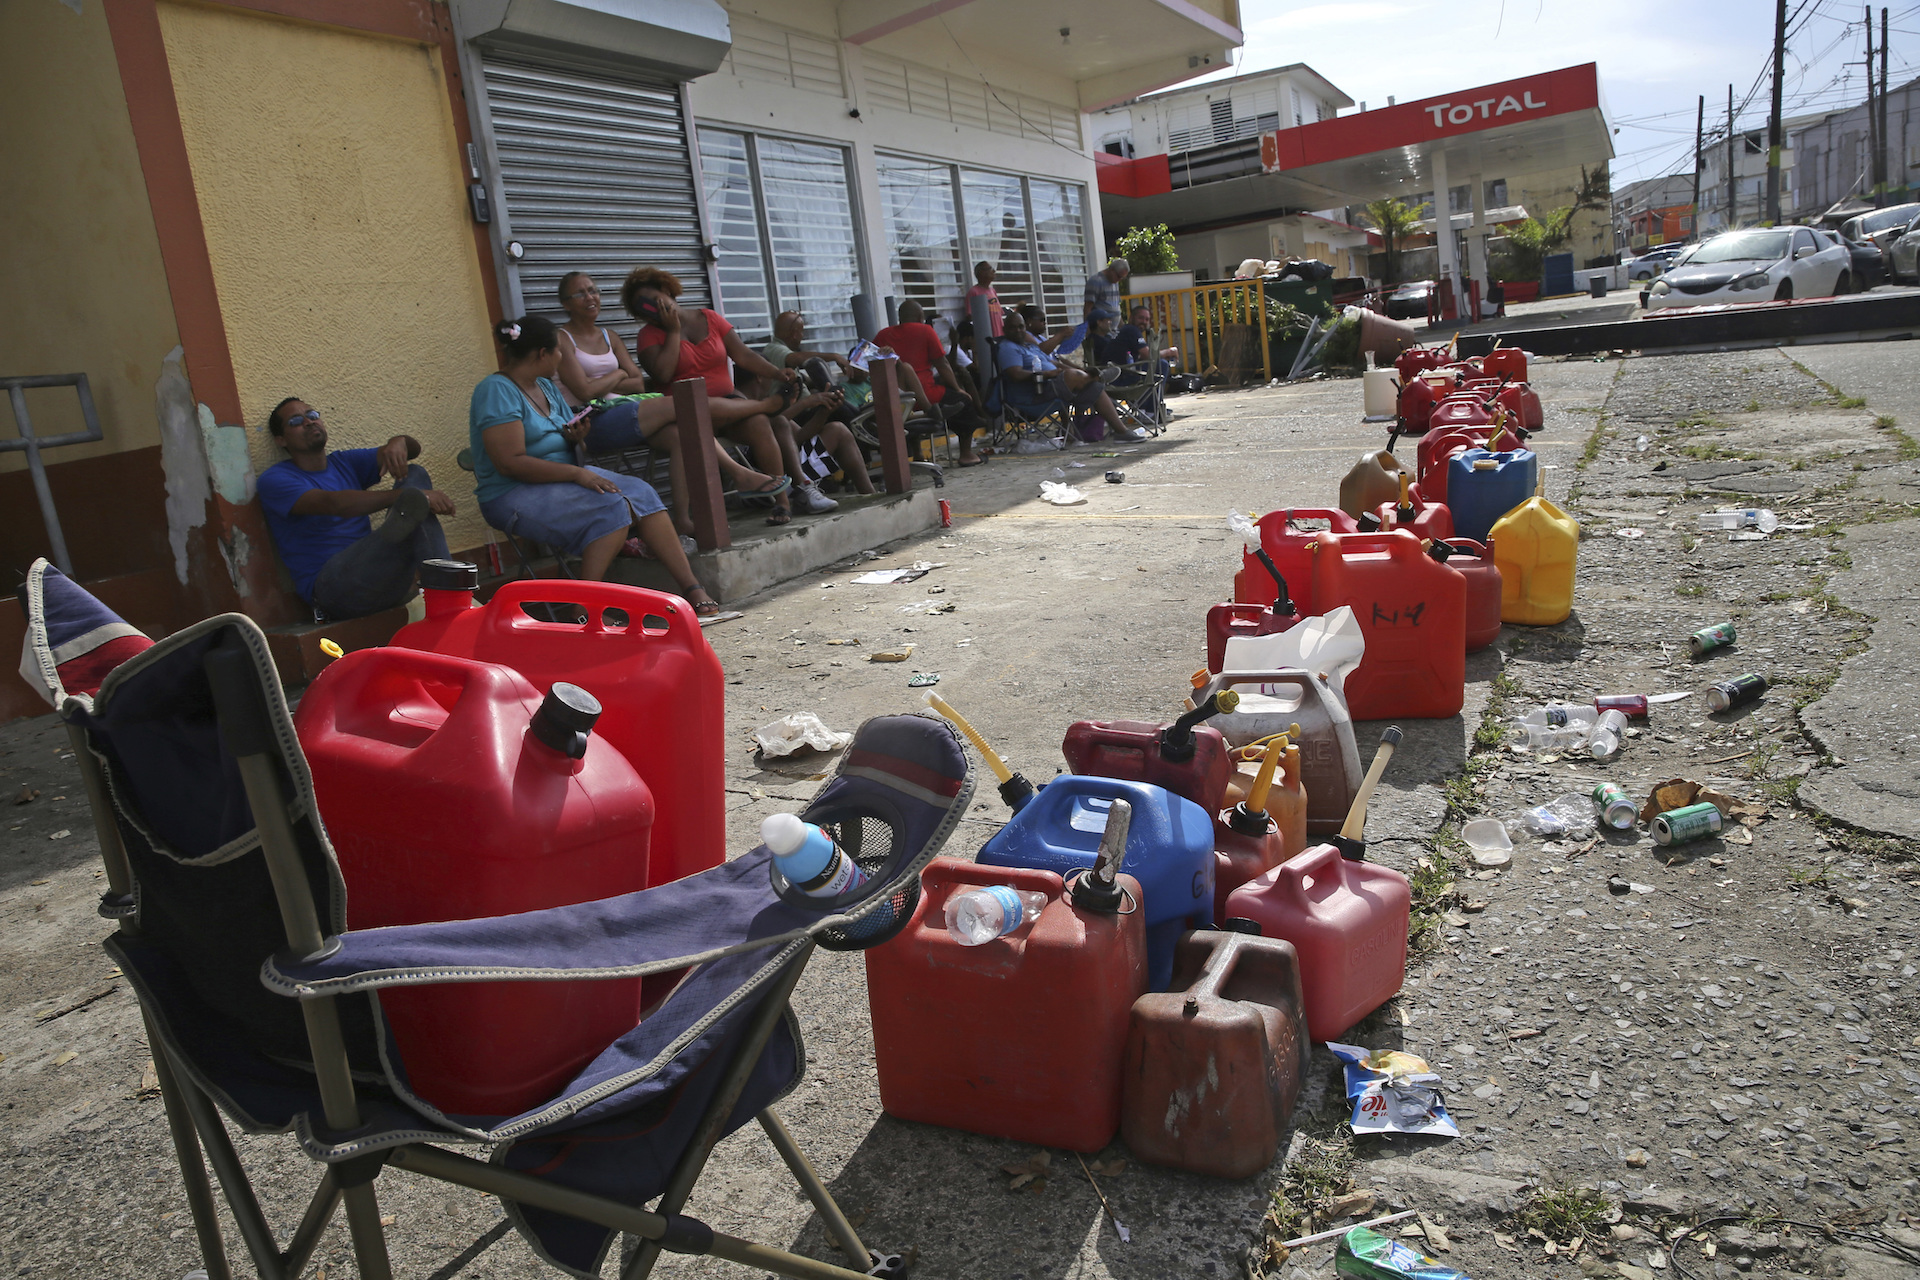 Line at a gas station in Puerto Rico